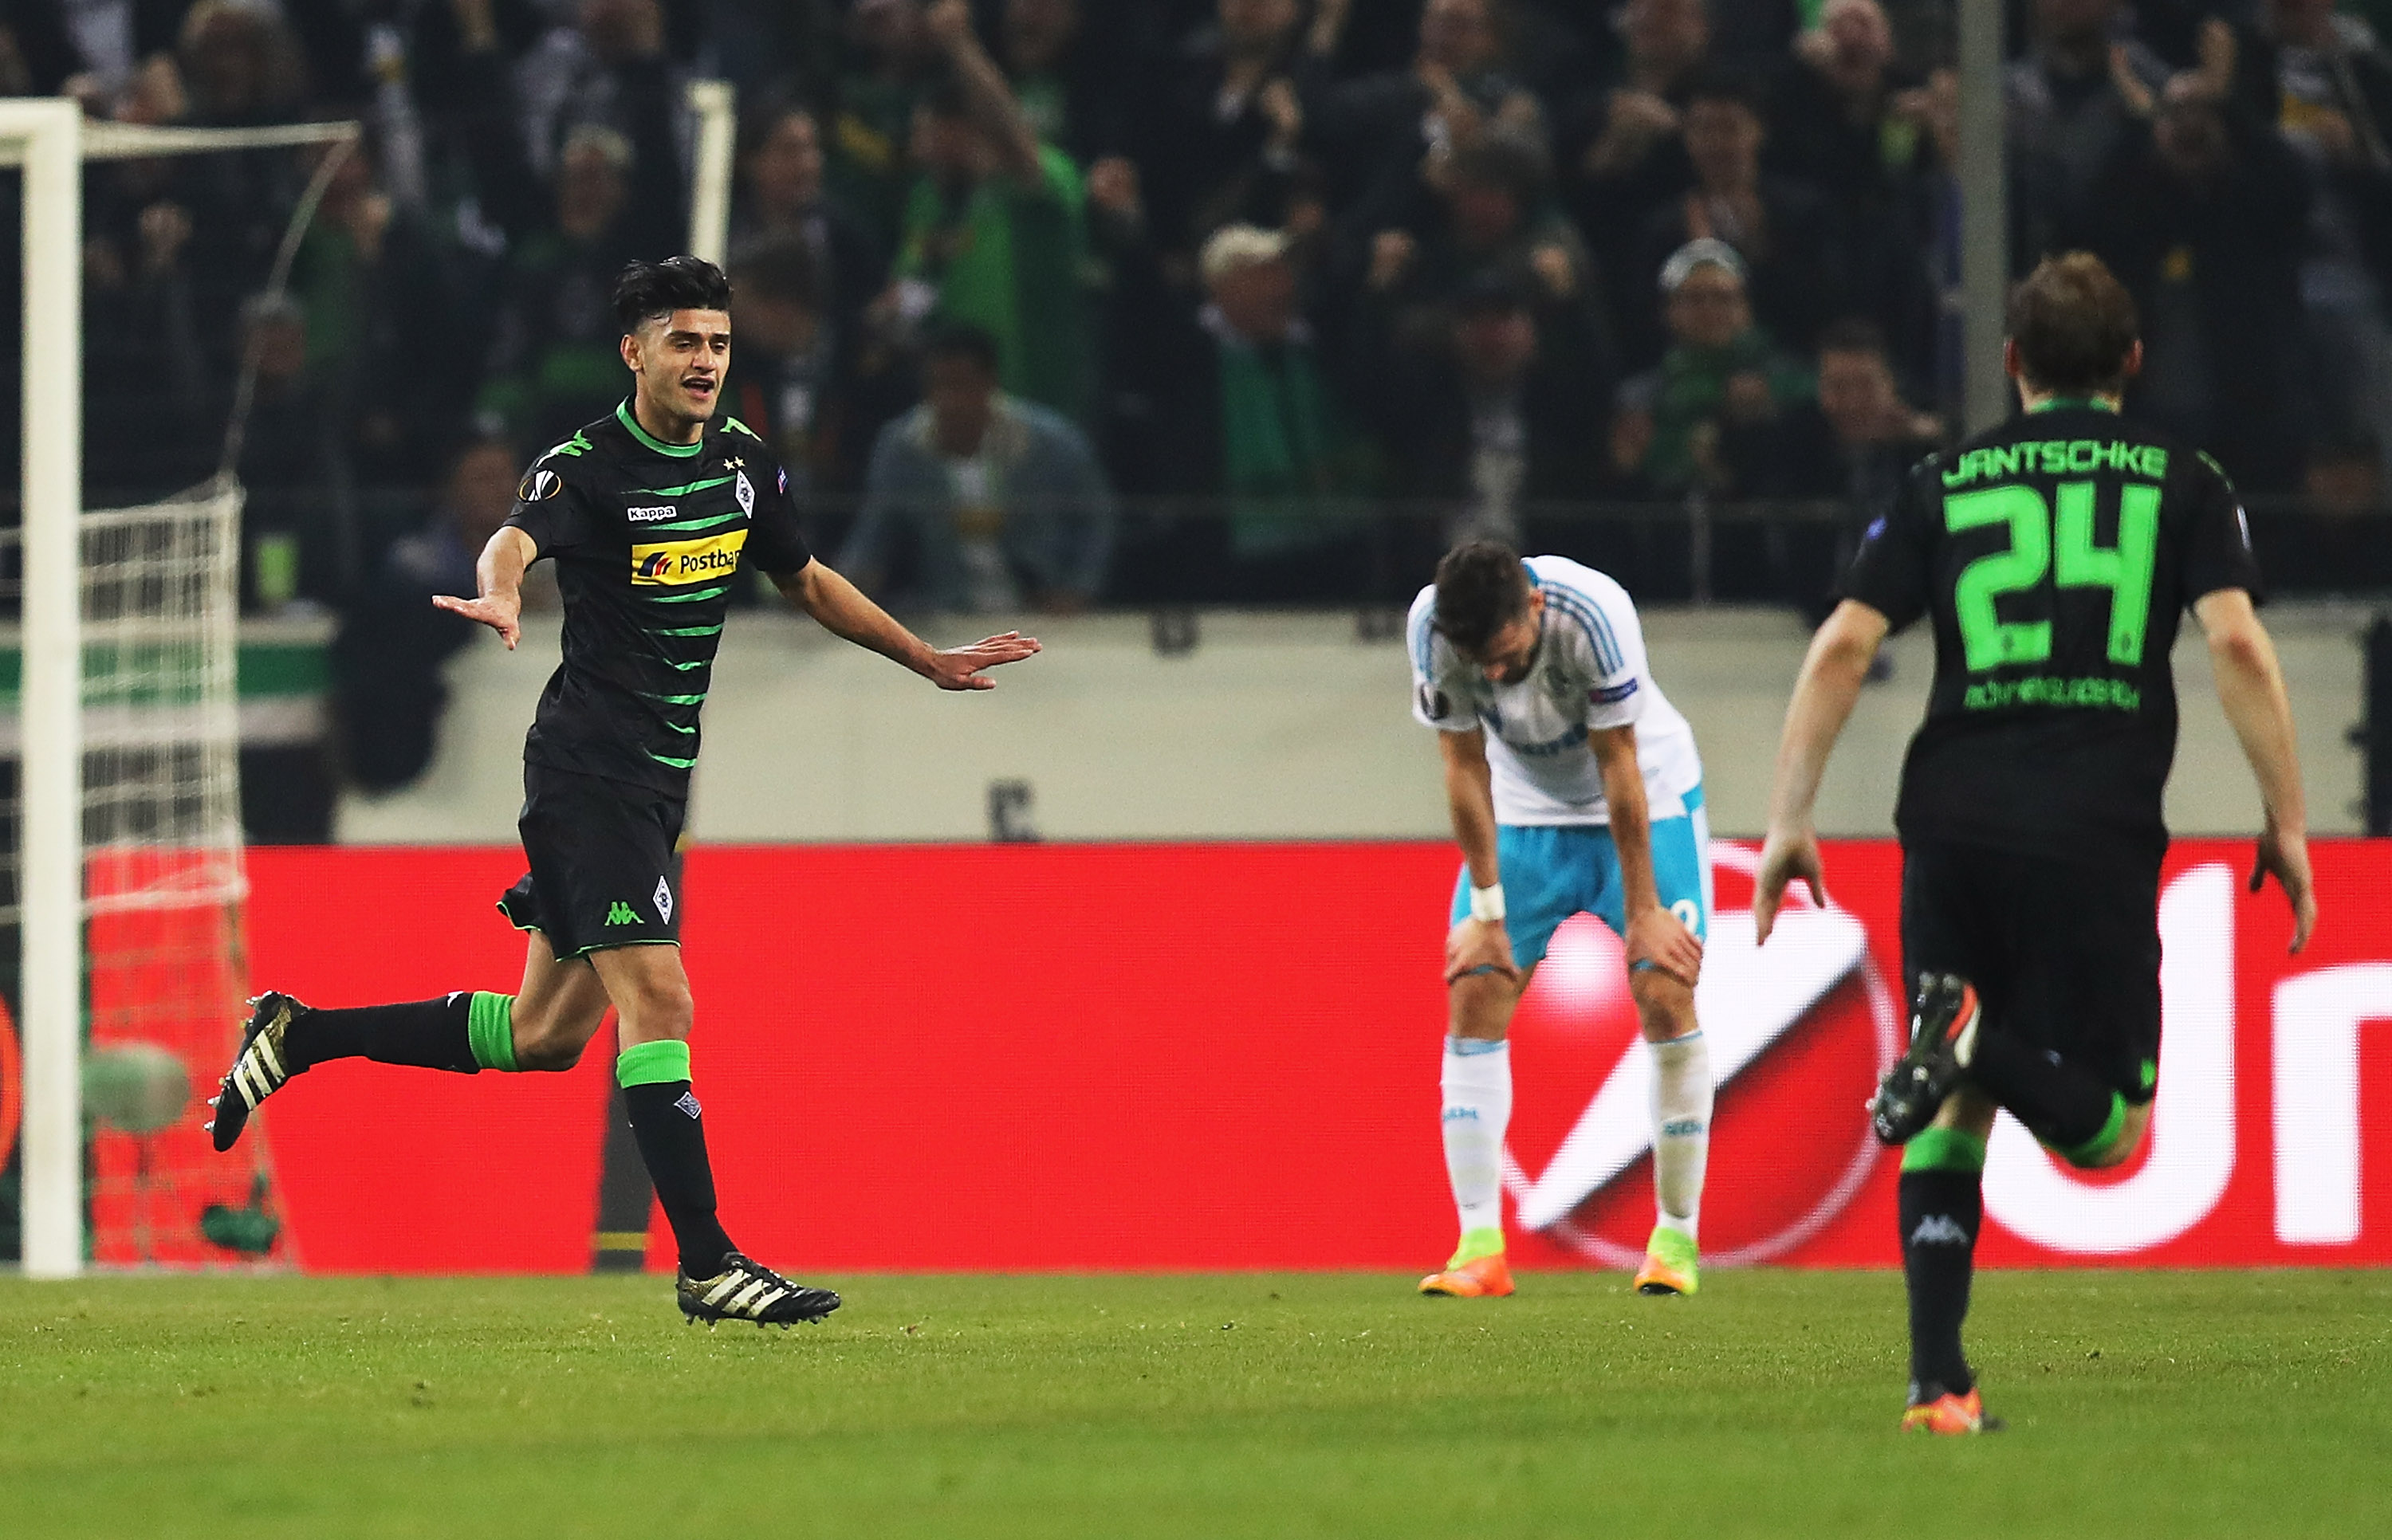 MOENCHENGLADBACH, GERMANY - MARCH 16:  Mahmoud Dahoud of Borussia Moenchengladbach celebrates after scoring a goal during the UEFA Europa League Round of 16 second leg match between Borussia Moenchengladbach and FC Schalke 04 at Borussia Park Stadium on March 16, 2017 in Moenchengladbach, Germany.  (Photo by Maja Hitij/Bongarts/Getty Images)